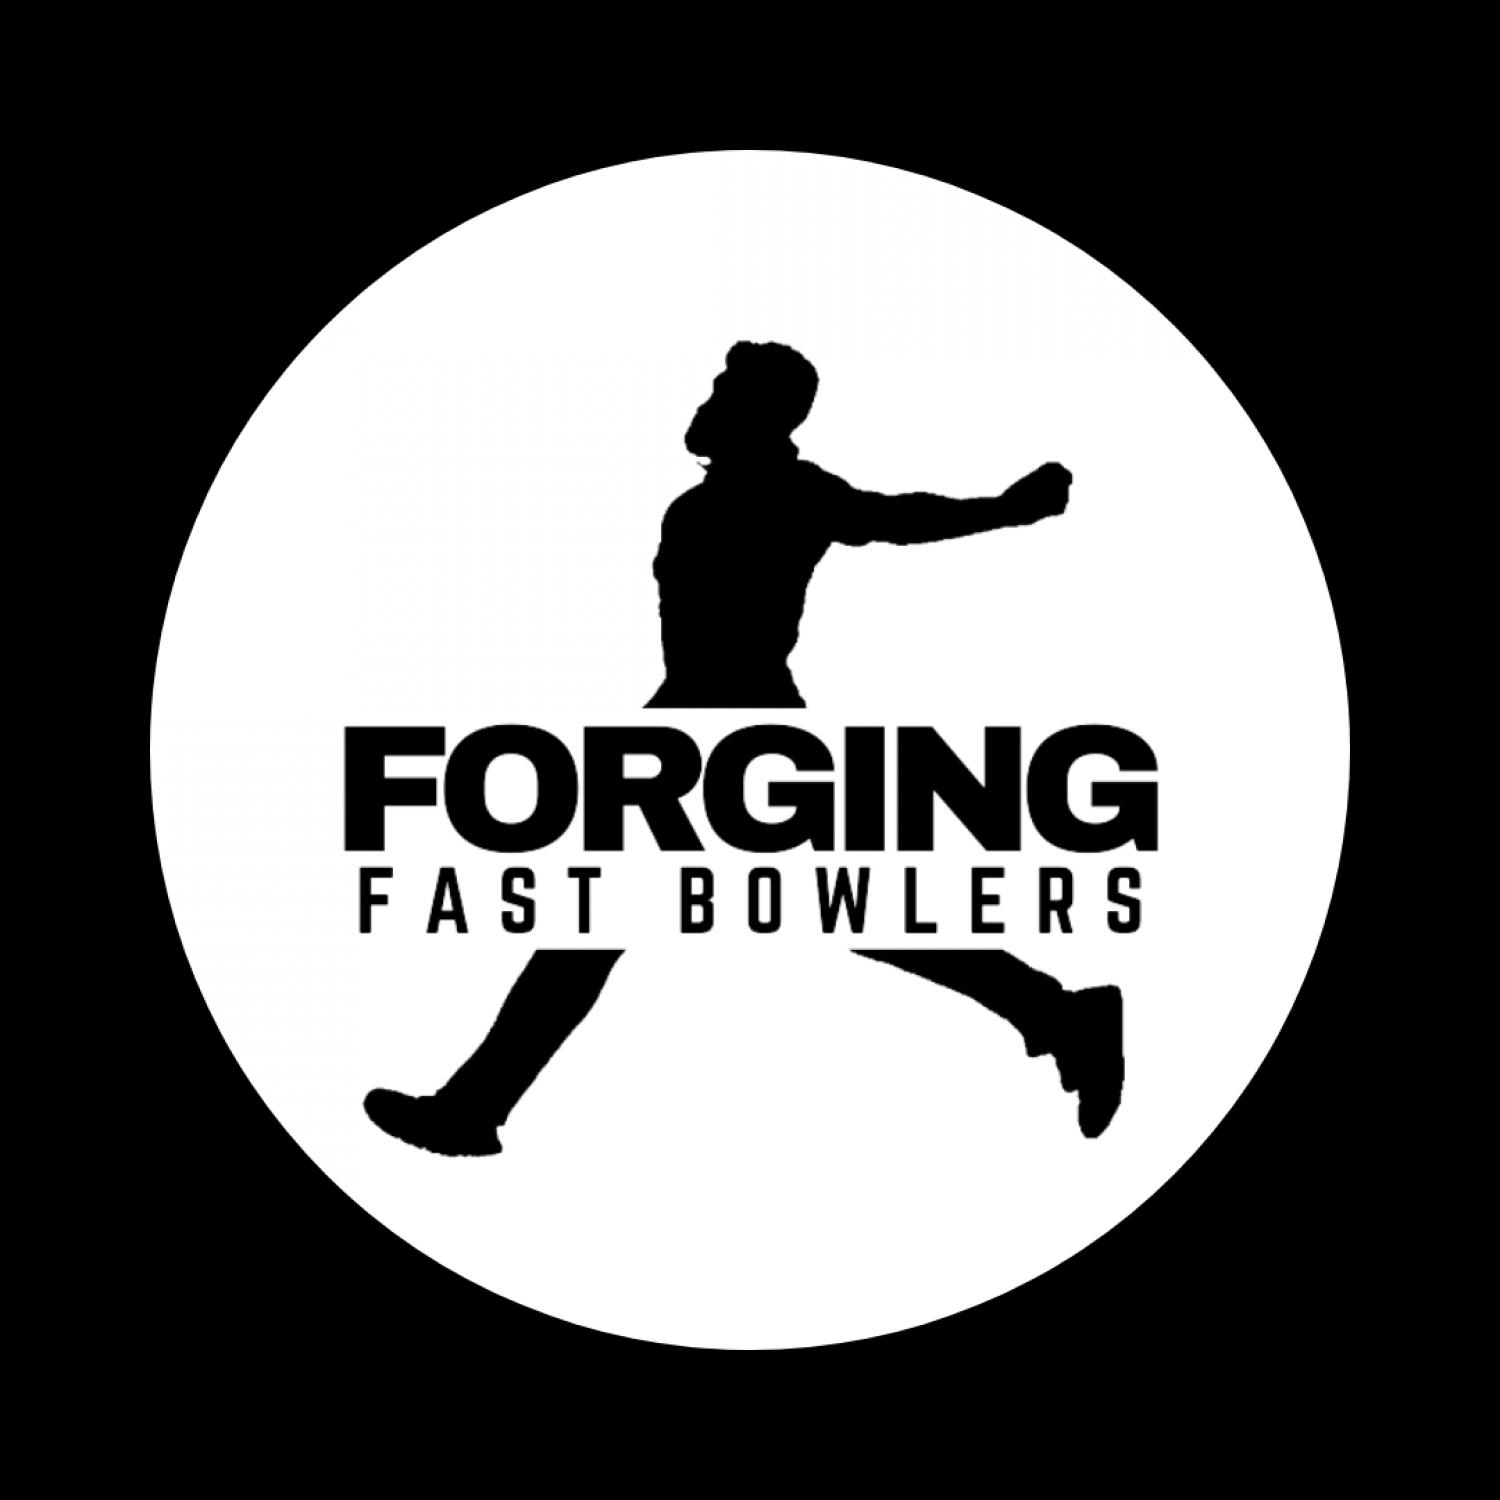 Forging fast bowlers | Team